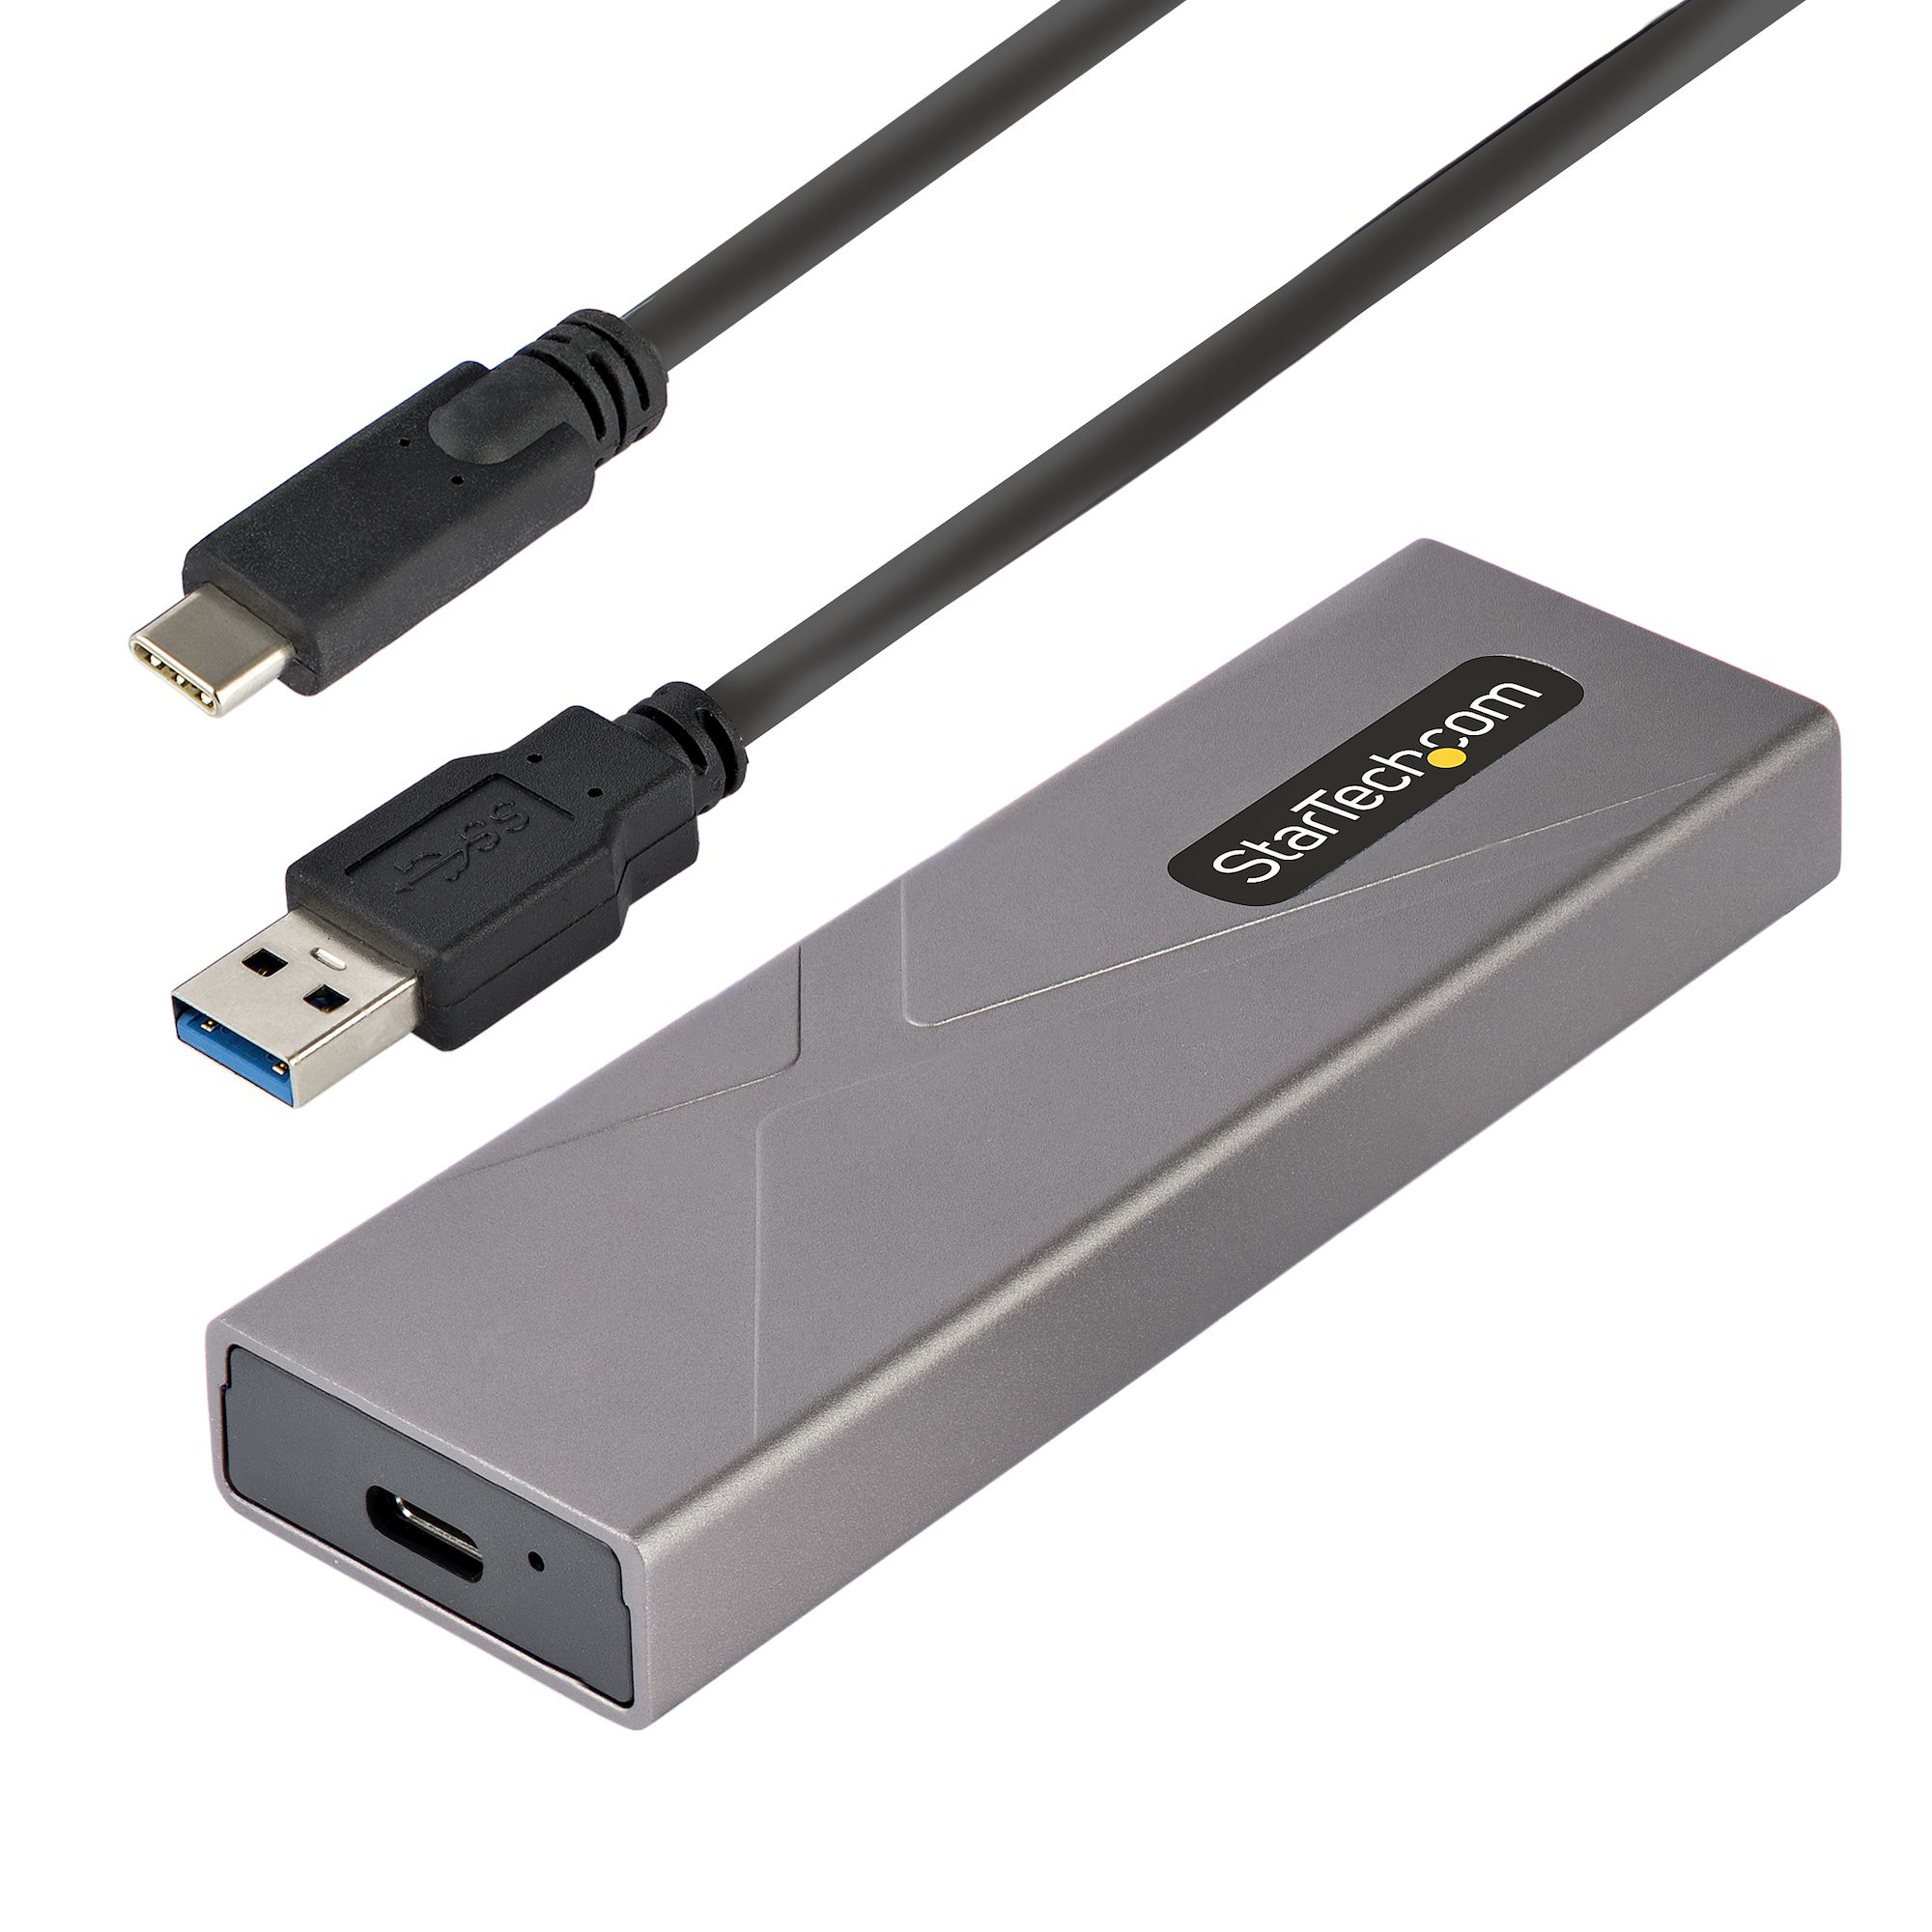 StarTech.com USB-C 10Gbps to M.2 NVMe or M.2 SATA SSD Enclosure - Tool-free External M.2 PCIe/SATA NGFF SSD Aluminum Case - USB Type-C&A Host Cables - Supports 2230/2242/2260/2280, SSD enclosure, M.2, M.2, 10 Gbit/s, USB connectivity, Grey